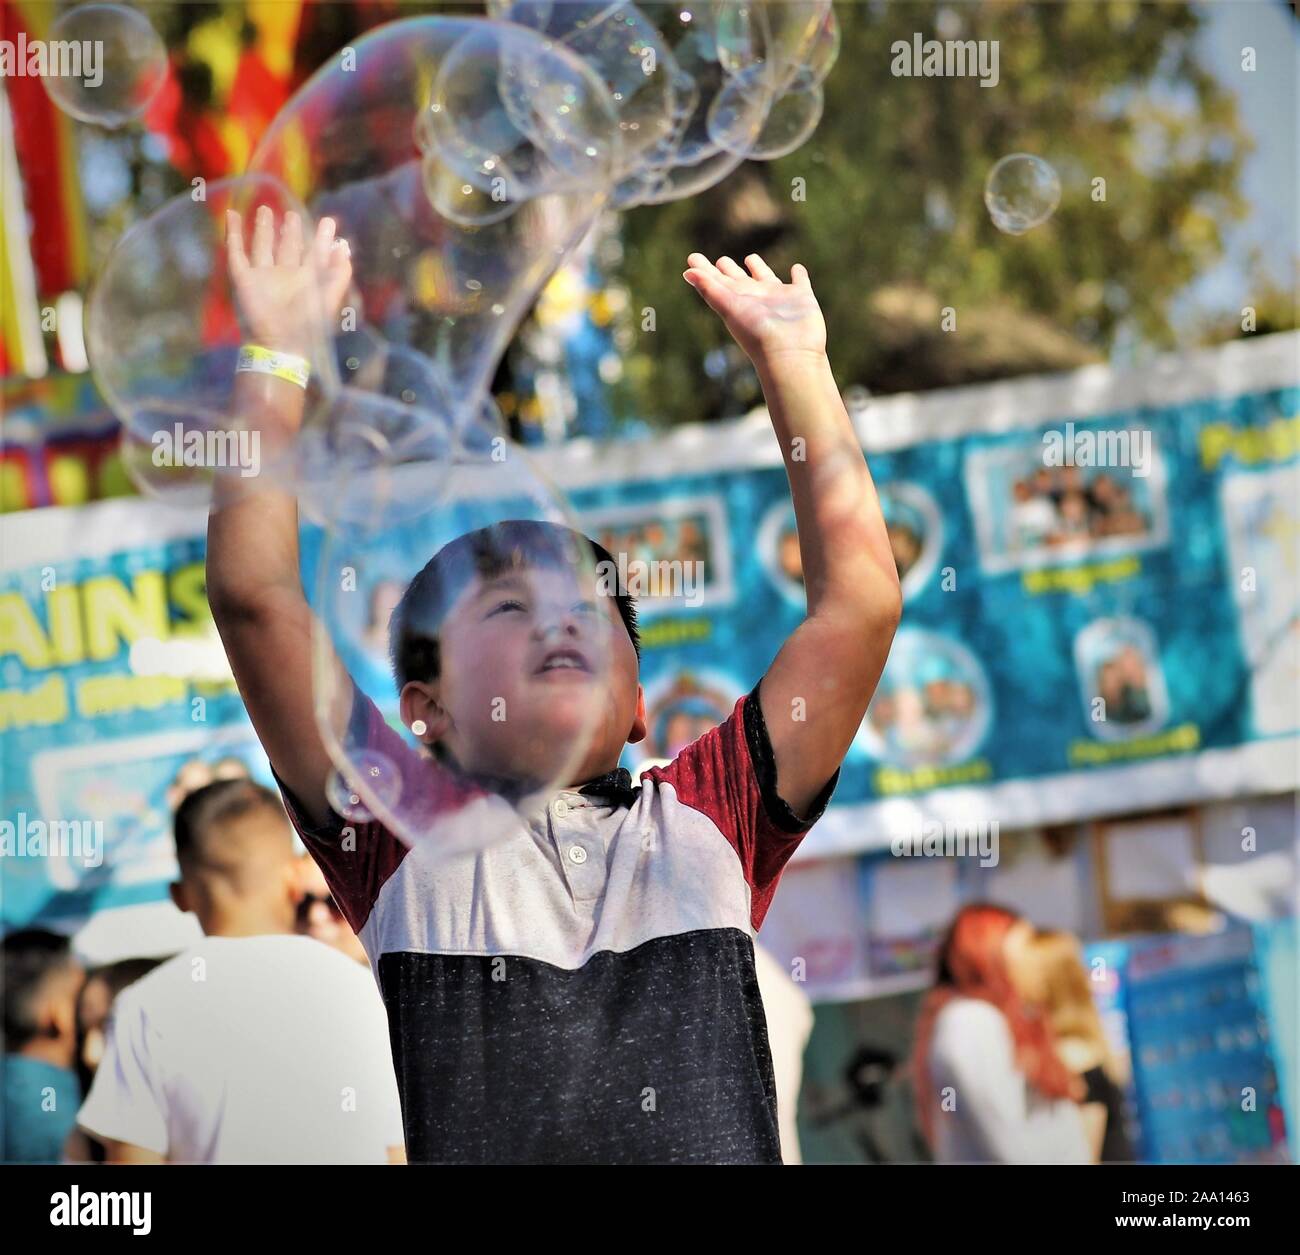 Hispanic Latin Mexican kids, boys and girls, chasing bubbles from fair circus act made with soap and water for public entertainment and family fun Stock Photo